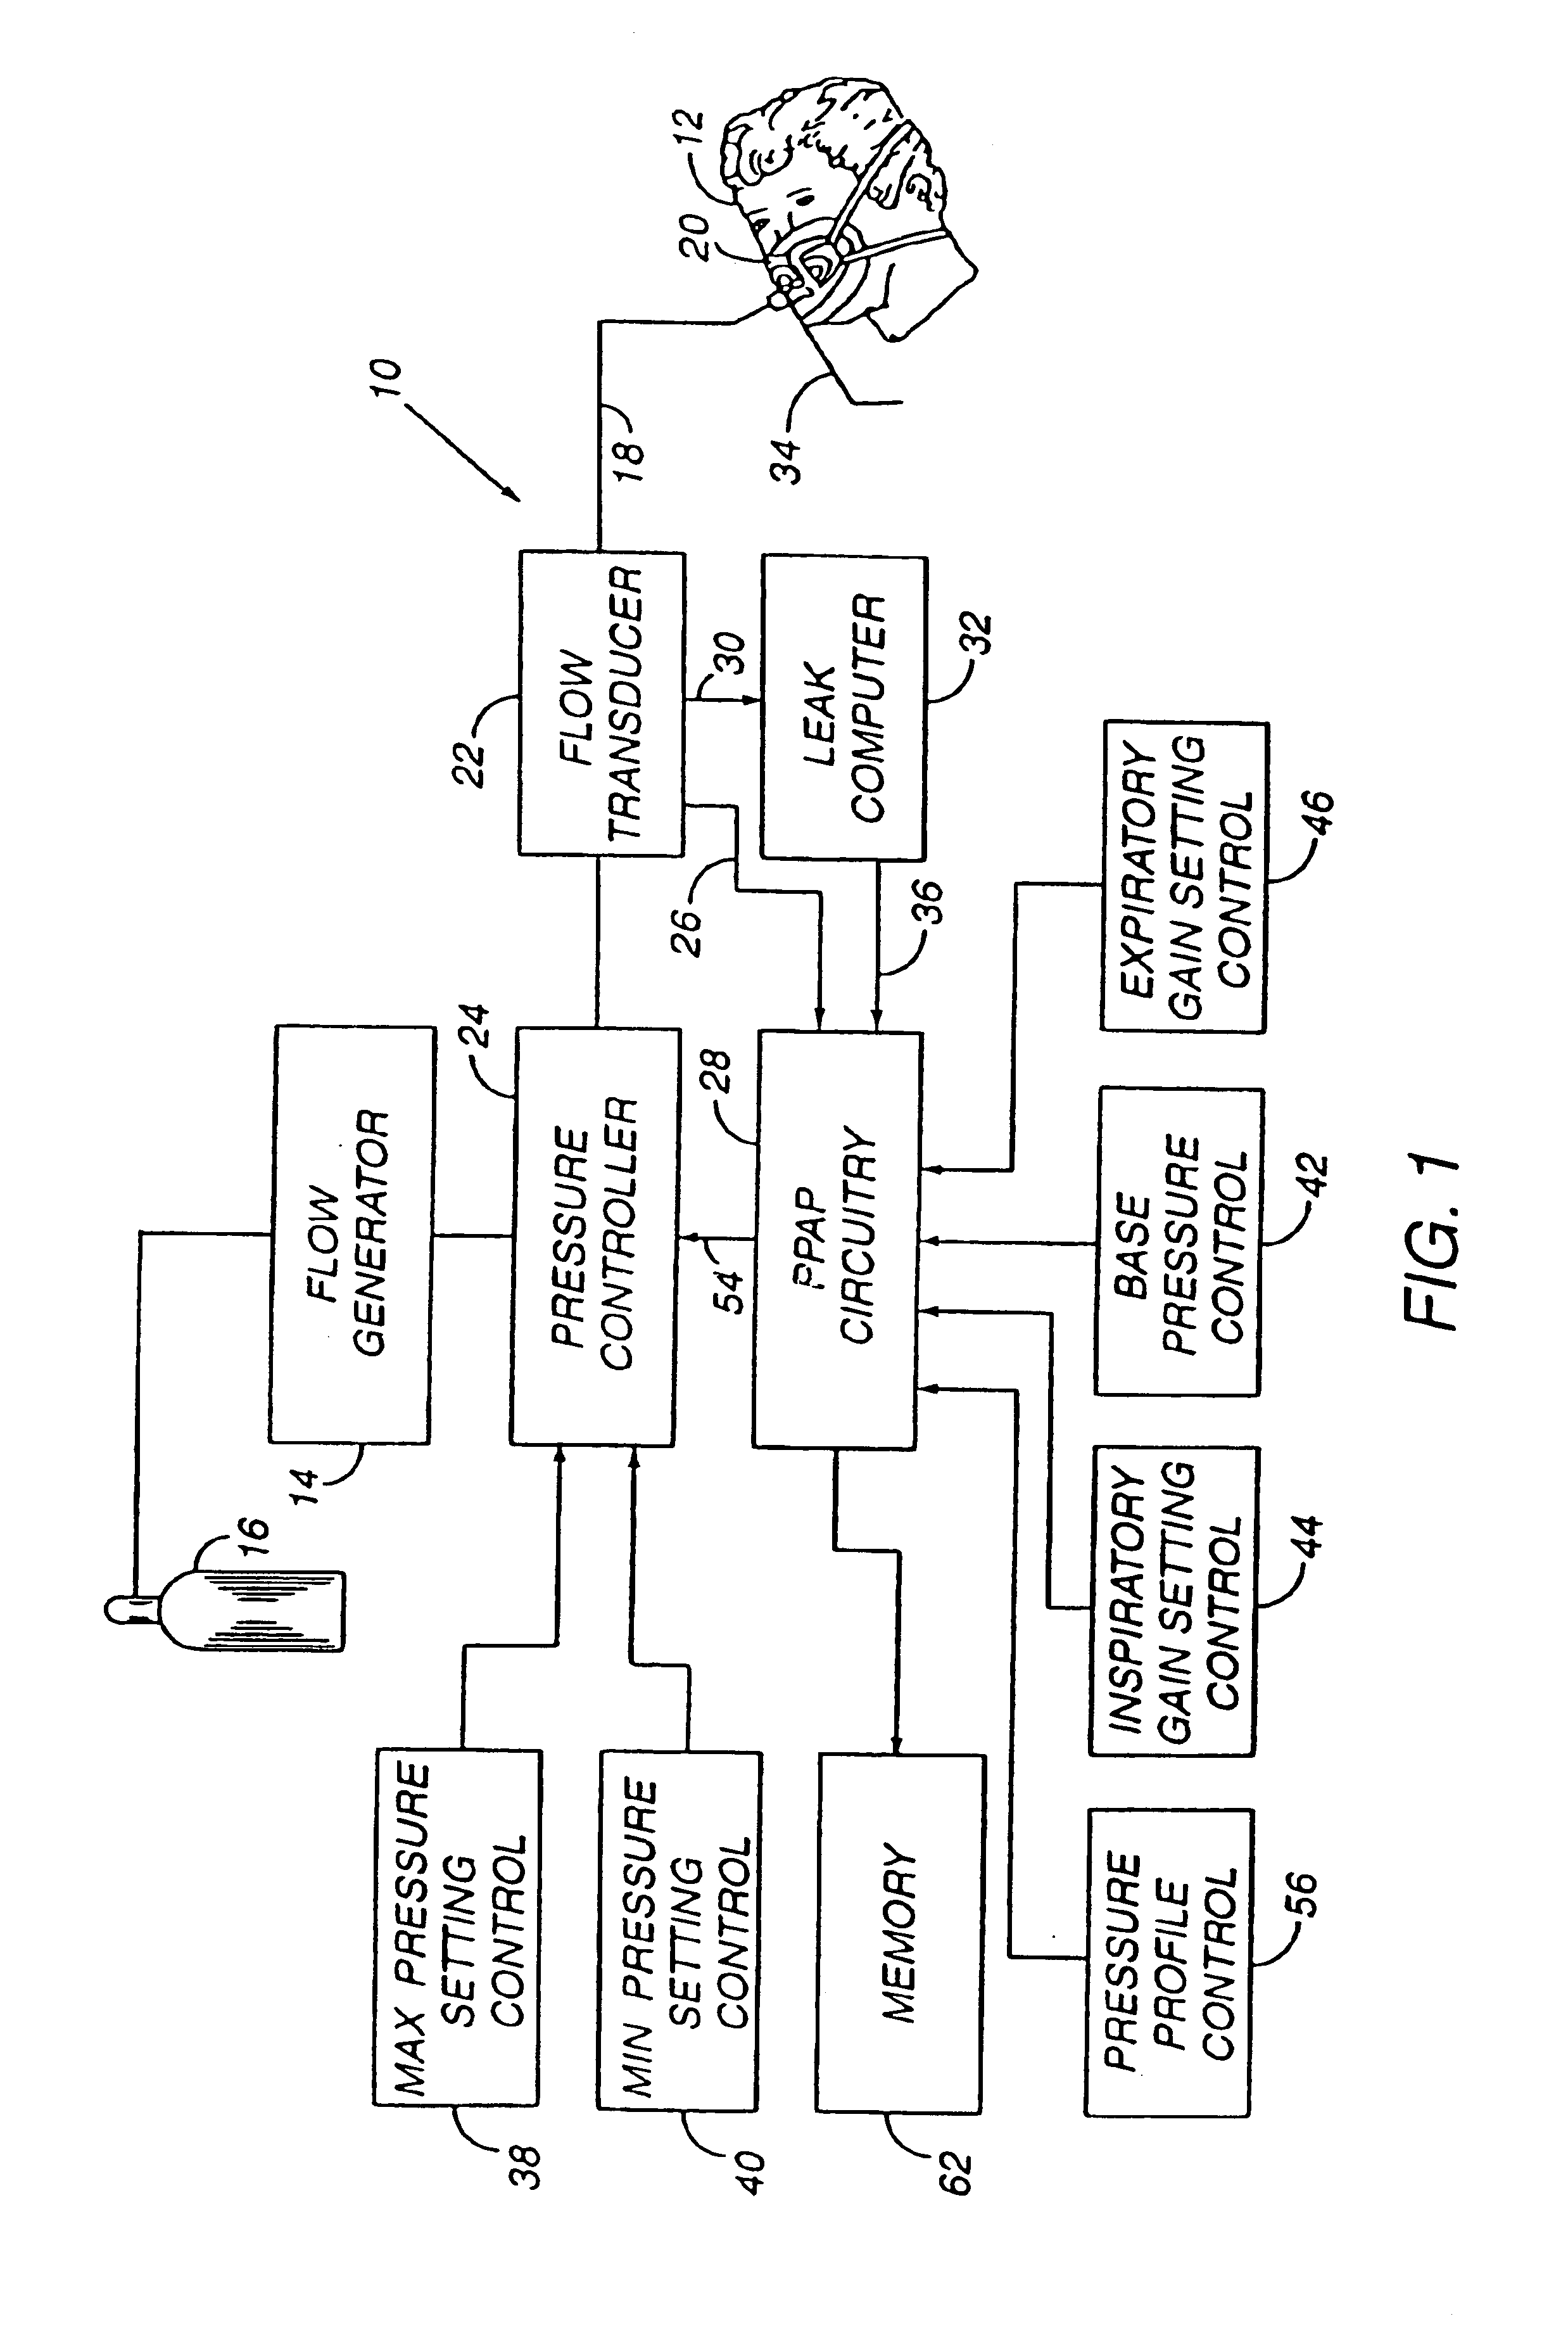 Method and apparatus for providing positive airway pressure to a patient